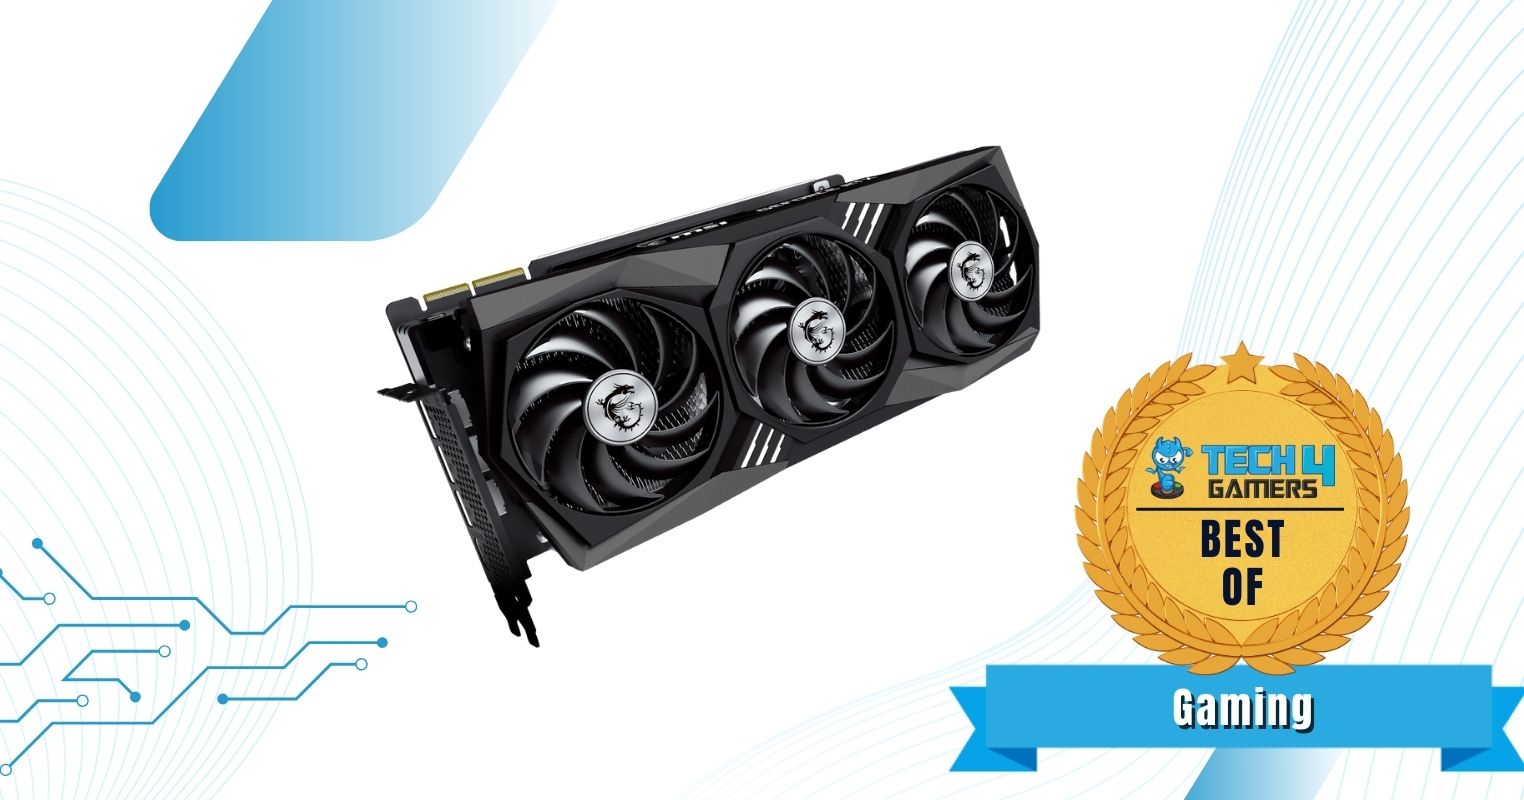 Best Gaming RTX 3090 Graphics Card - MSI Gaming GeForce RTX 3090 Gaming X Trio 24G